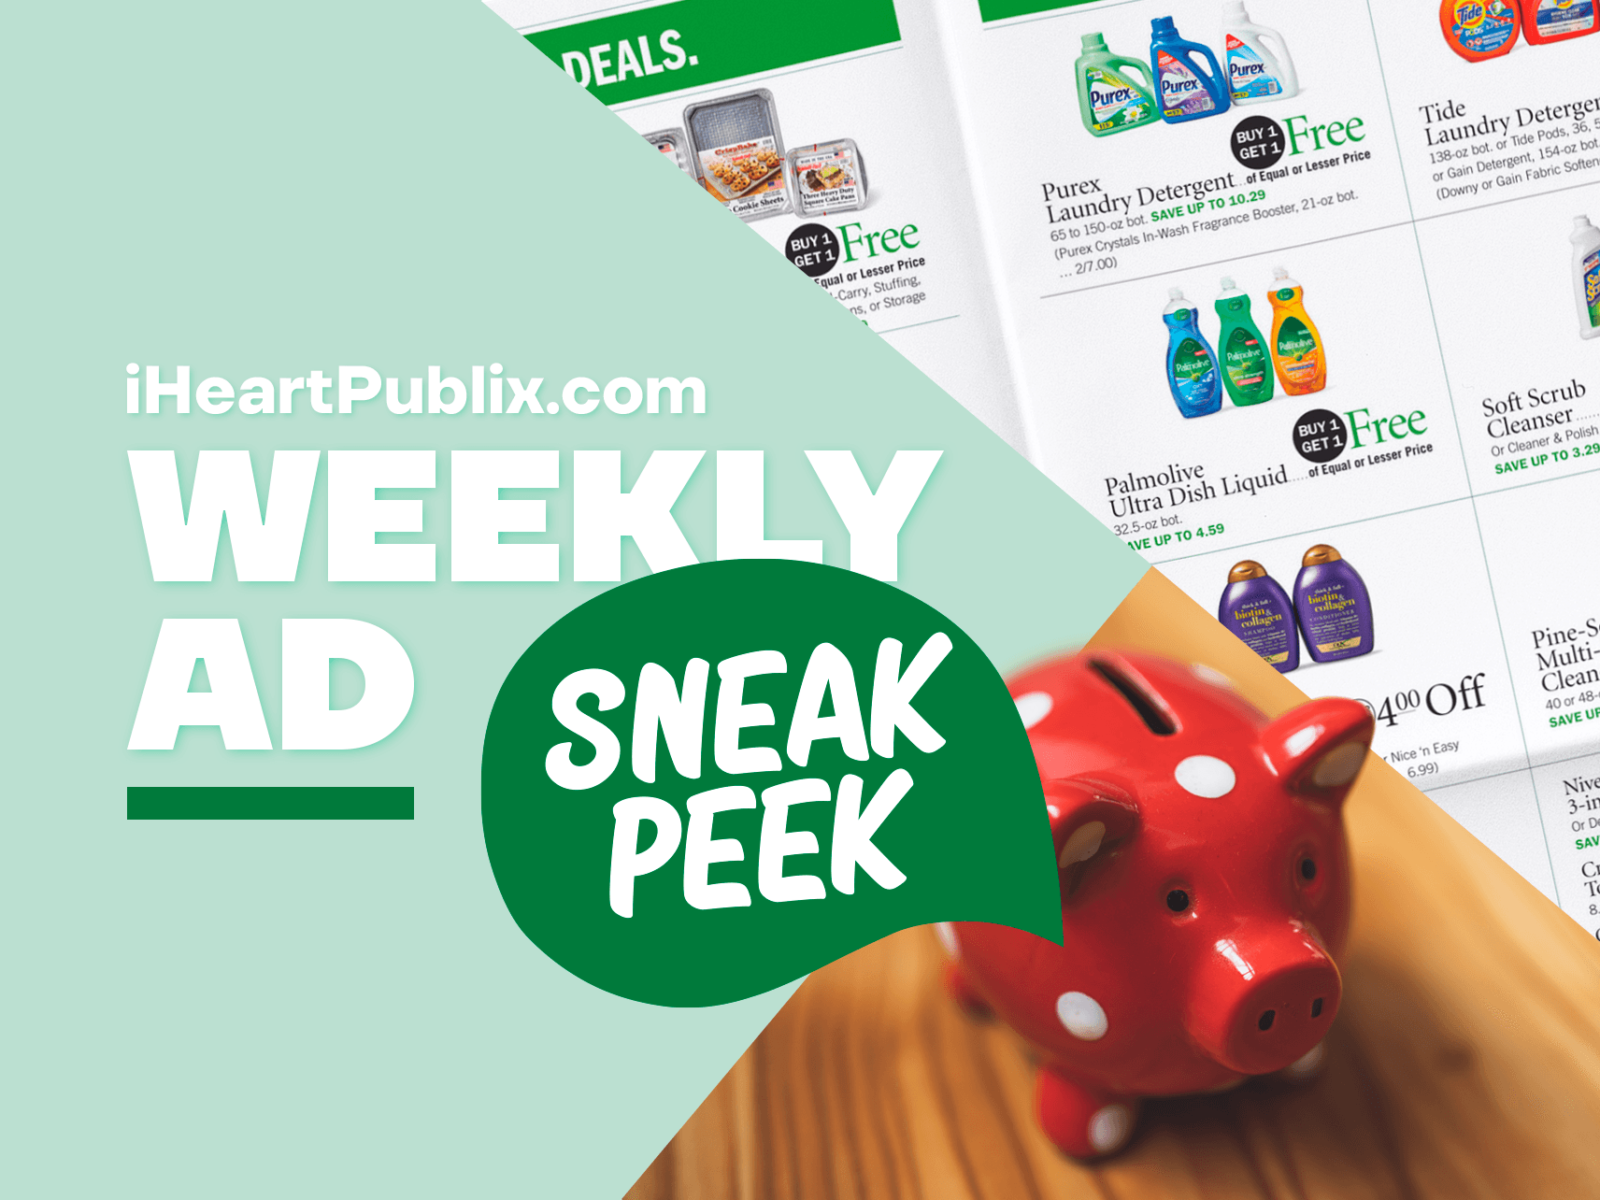 Publix Ad & Coupons Week Of 11/30 To 12/6 (11/29 To 12/5 For Some)